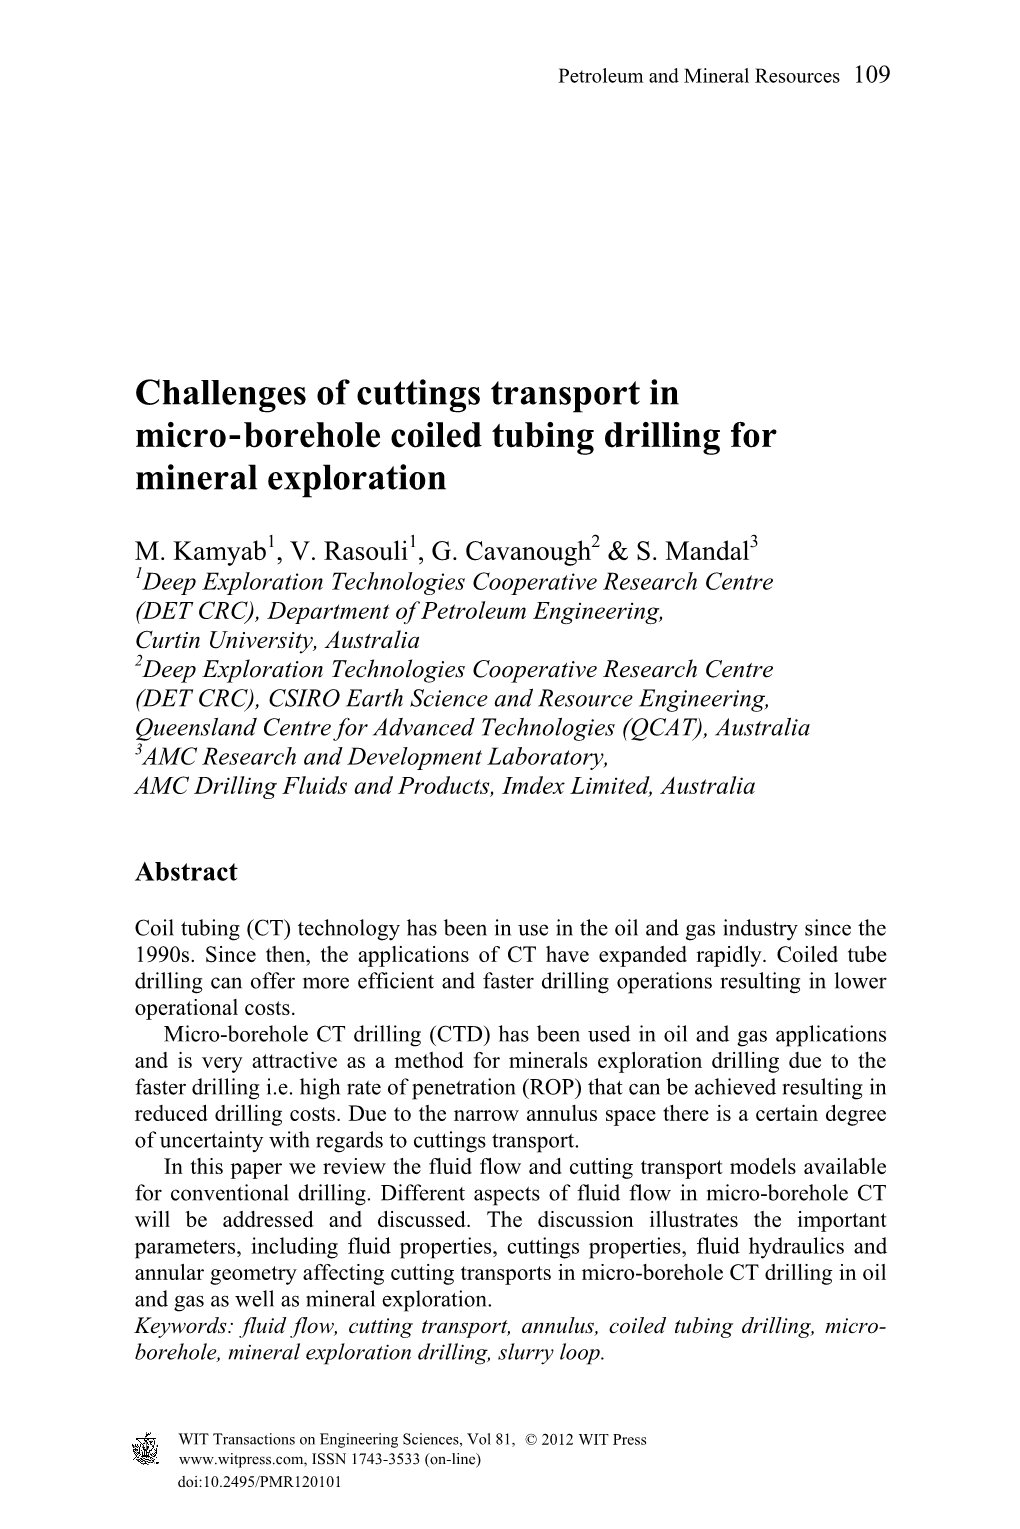 Challenges of Cuttings Transport in Micro Borehole Coiled